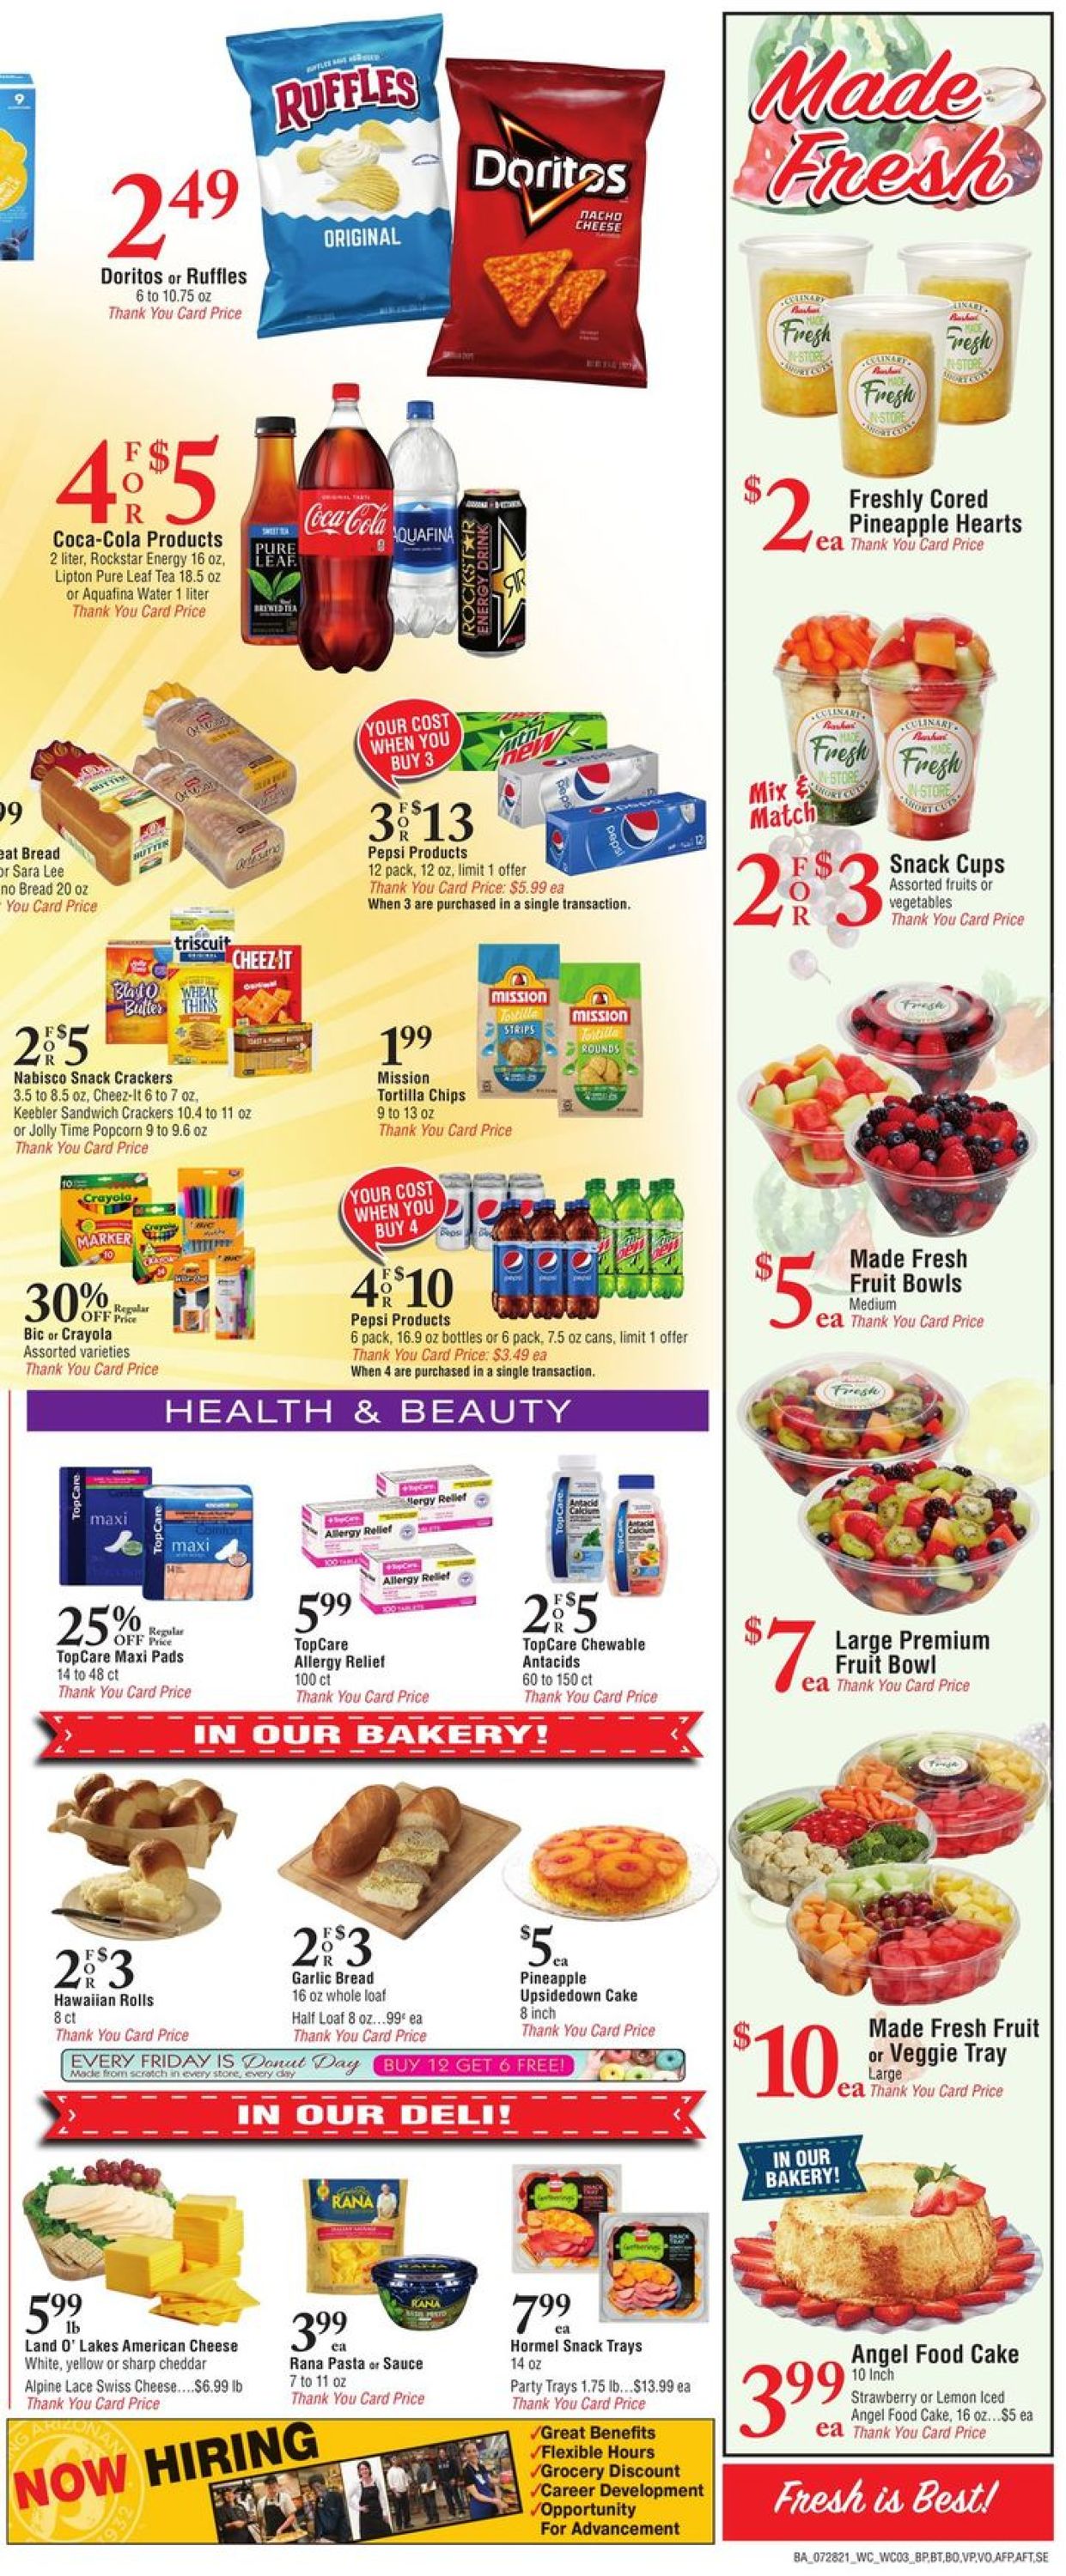 Bashas Ad from 07/28/2021